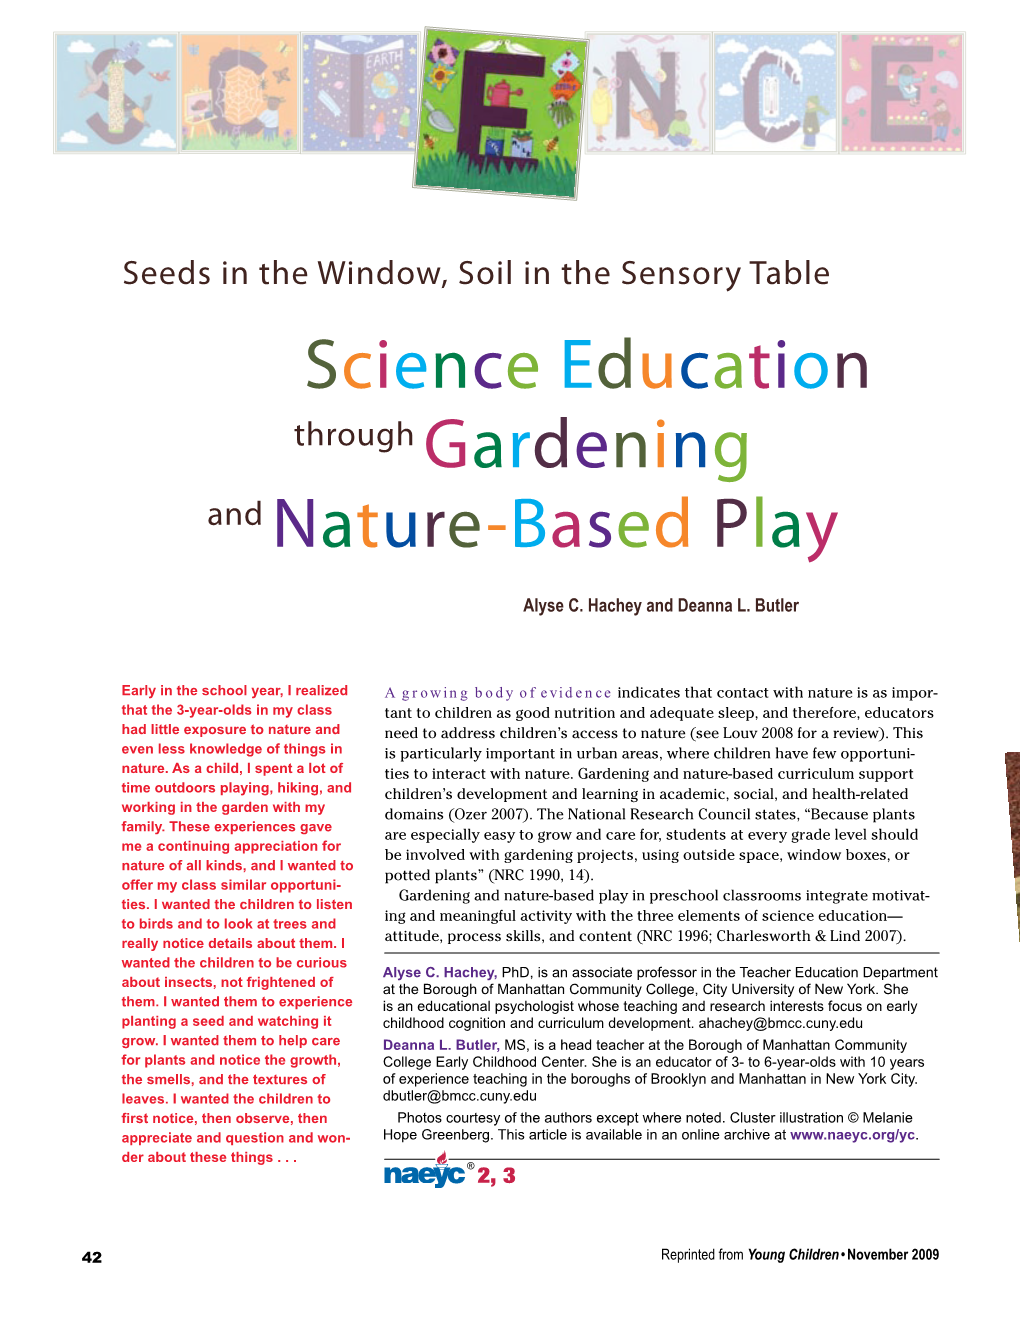 Science Education Through Gardening and Nature-Based Play